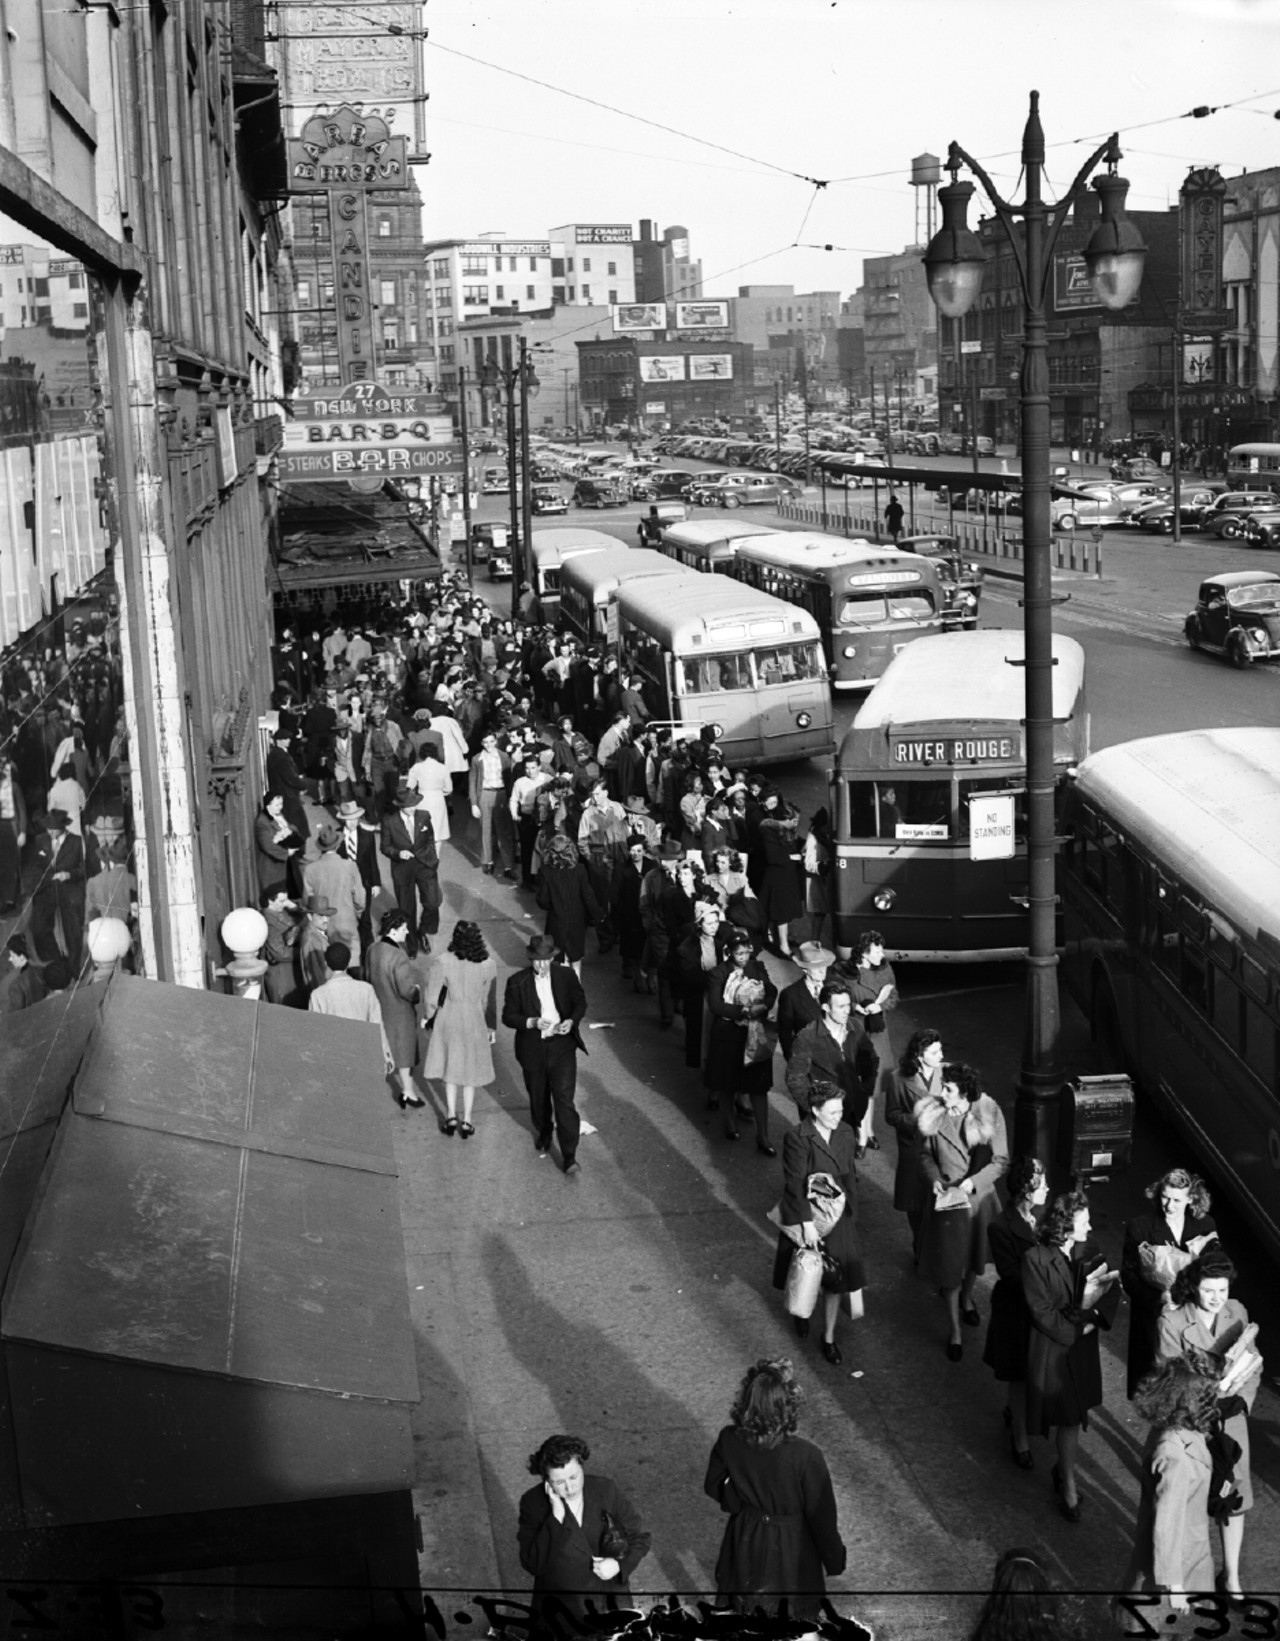 Though Detroiters loved their streetcars, DSR chief Fred Nolan loved buses more, and hoped to phase out rail transit by 1953. The only thing that prevented that from happening was World War II, given tire rationing, fuel rationing, and the tremendous need to move large amounts of war workers to defense plants.